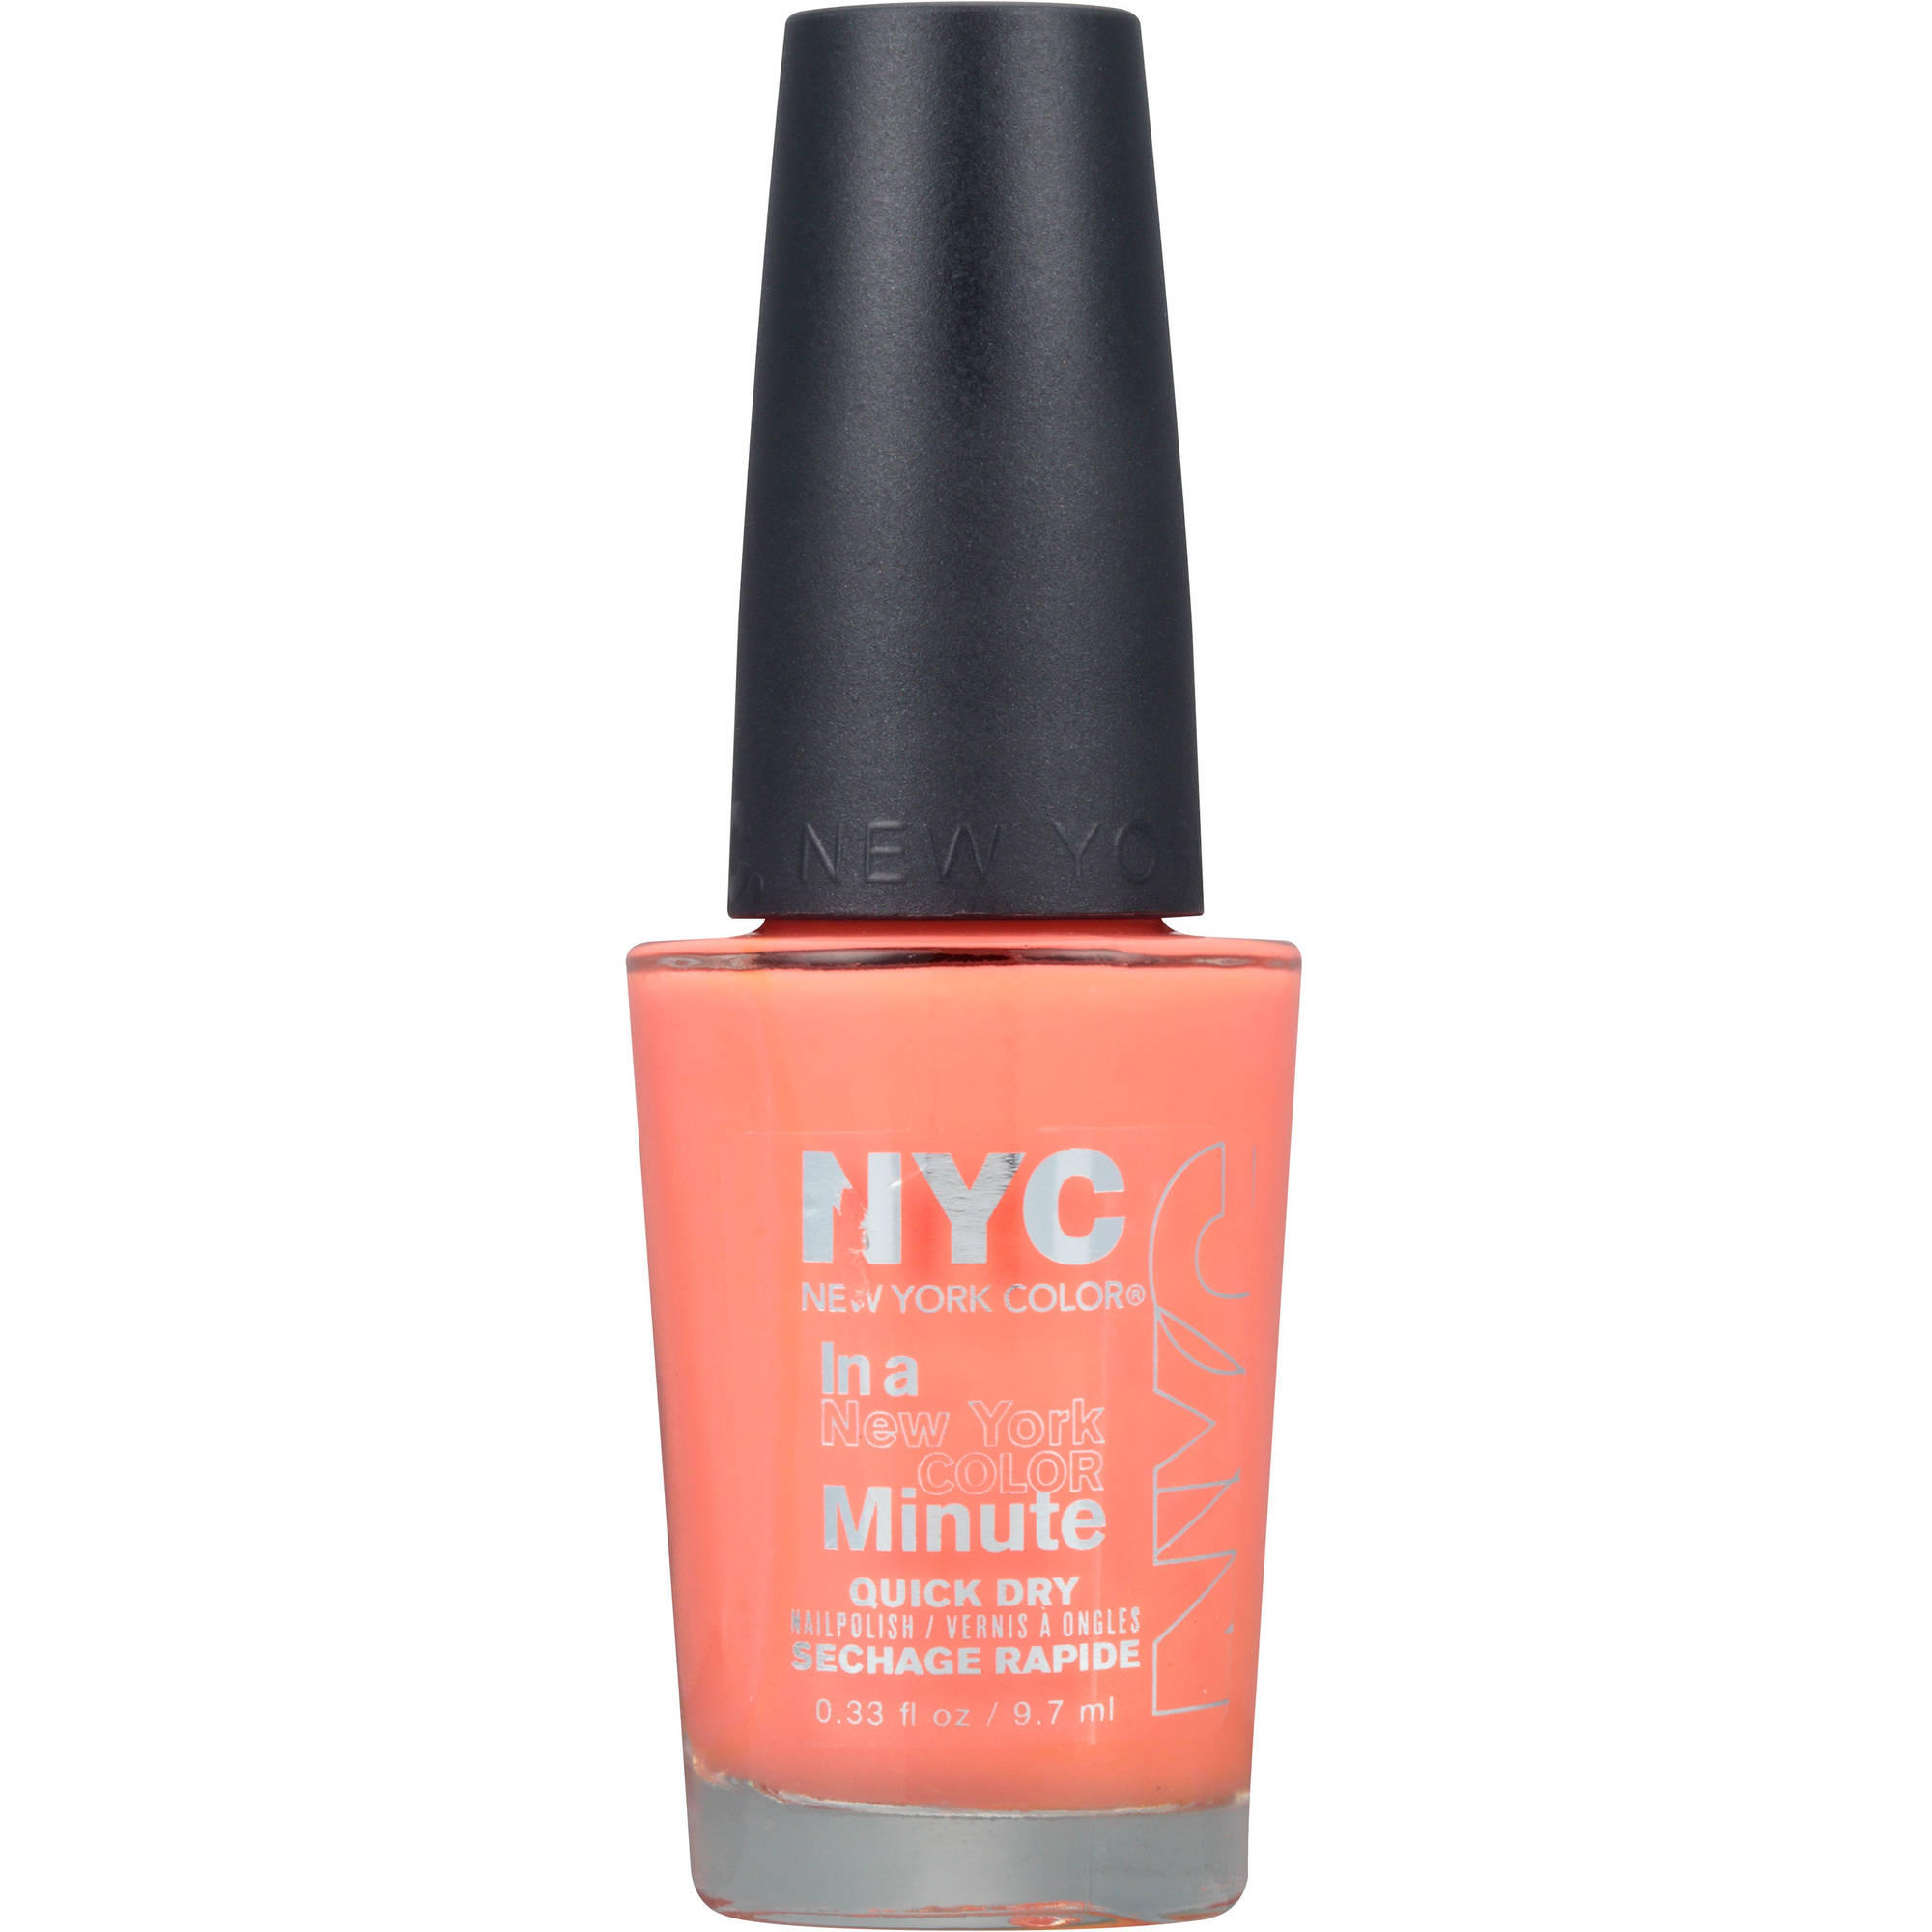 NYC New York Color In a Minute Nail Polish, 267 Hamptons Peach, 0.33 Fl. Oz. - image 1 of 3